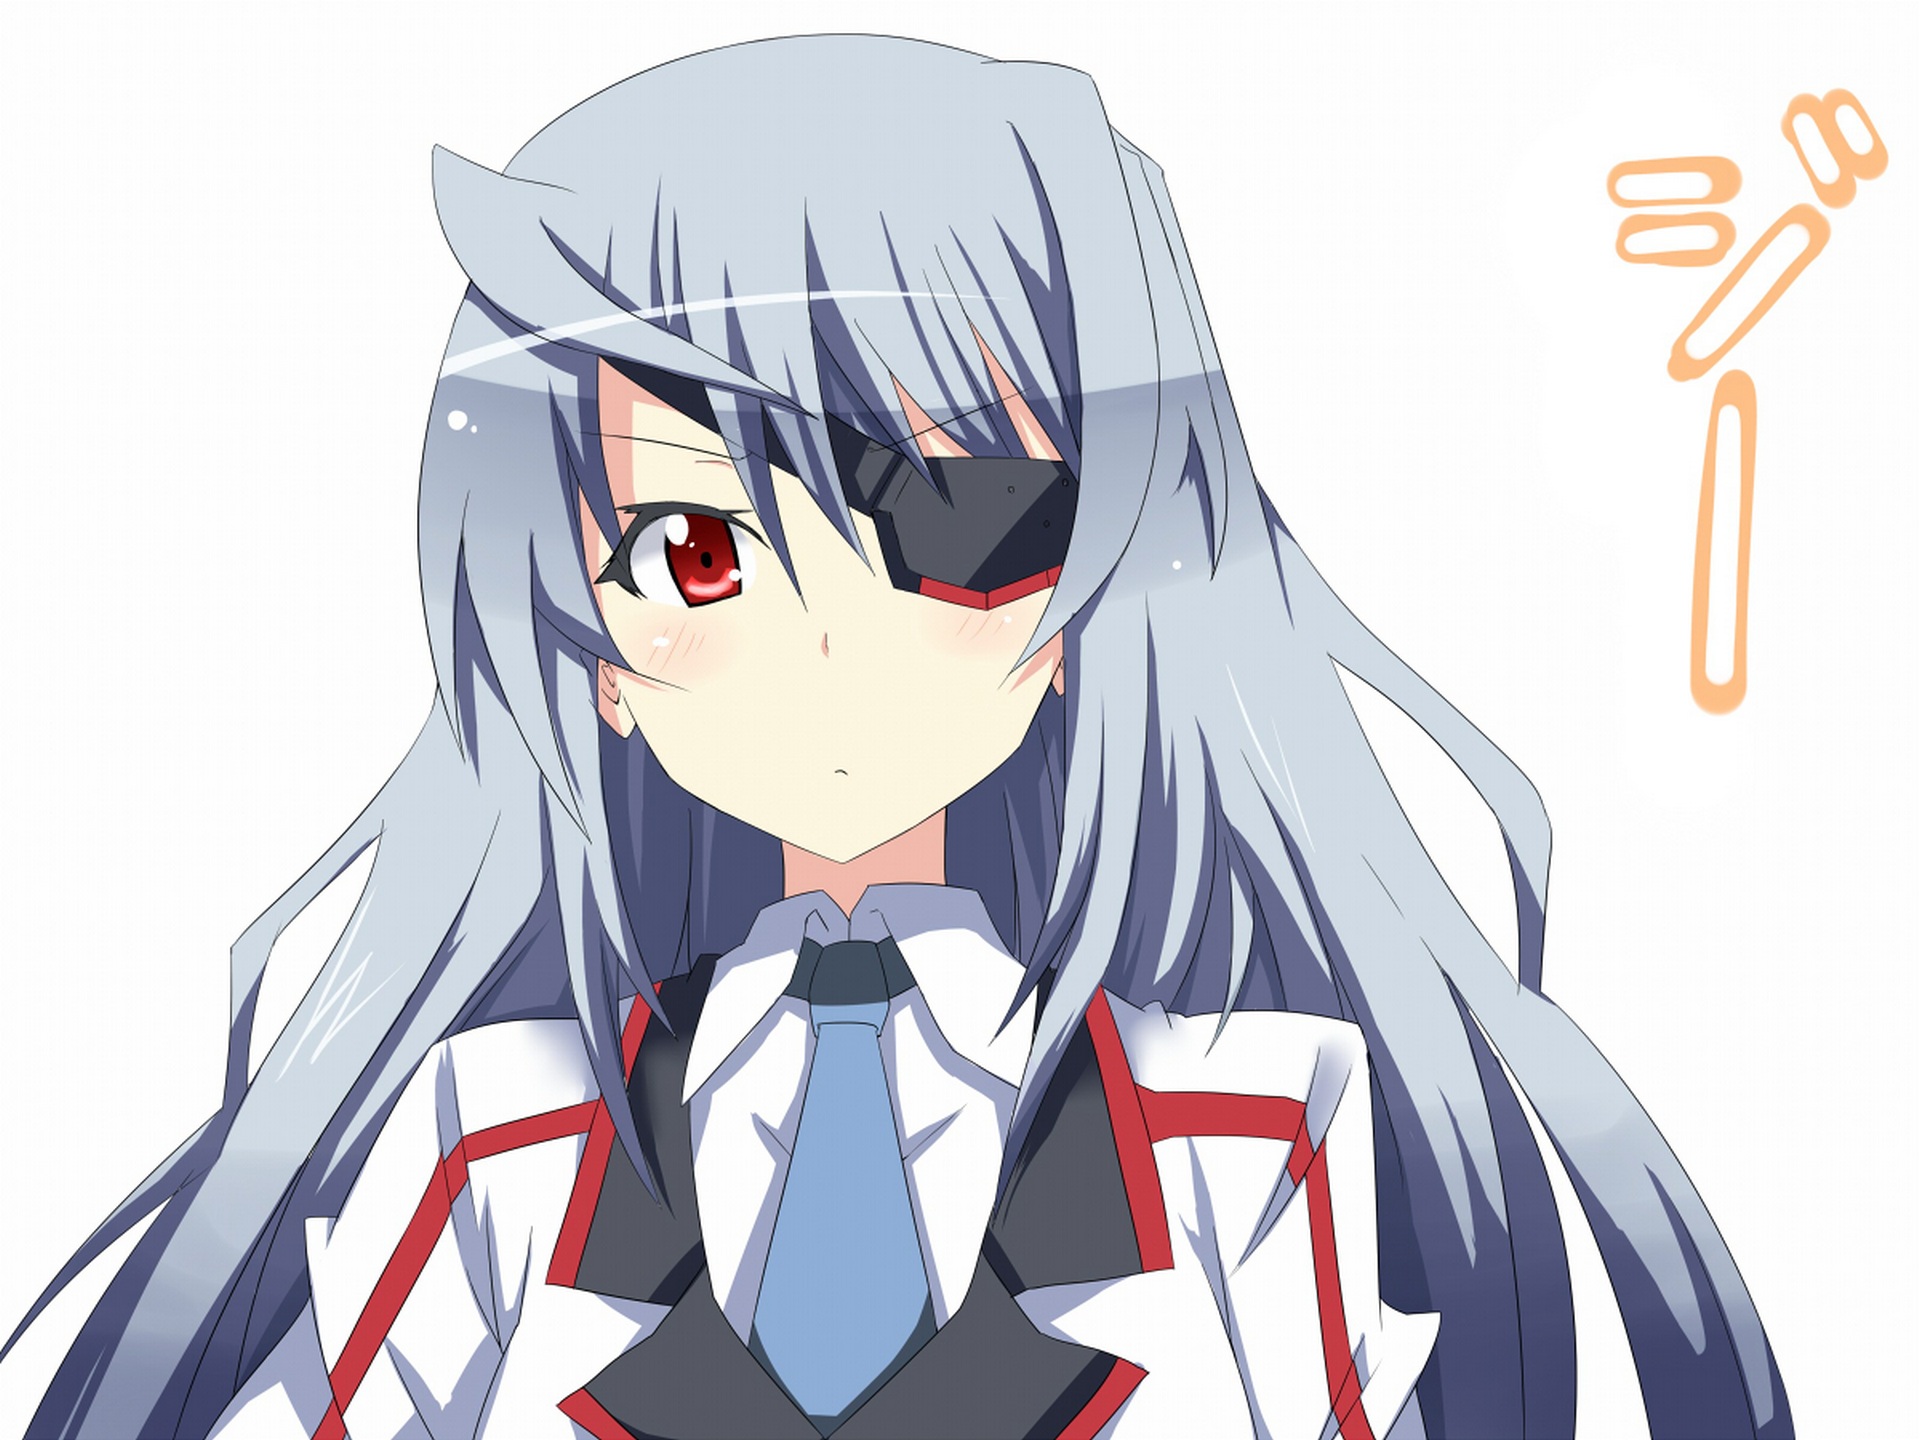 4582595 anime, anime girls, eye patch, bunny suit, Bodewig Laura, Infinite  Stratos - Rare Gallery HD Wallpapers